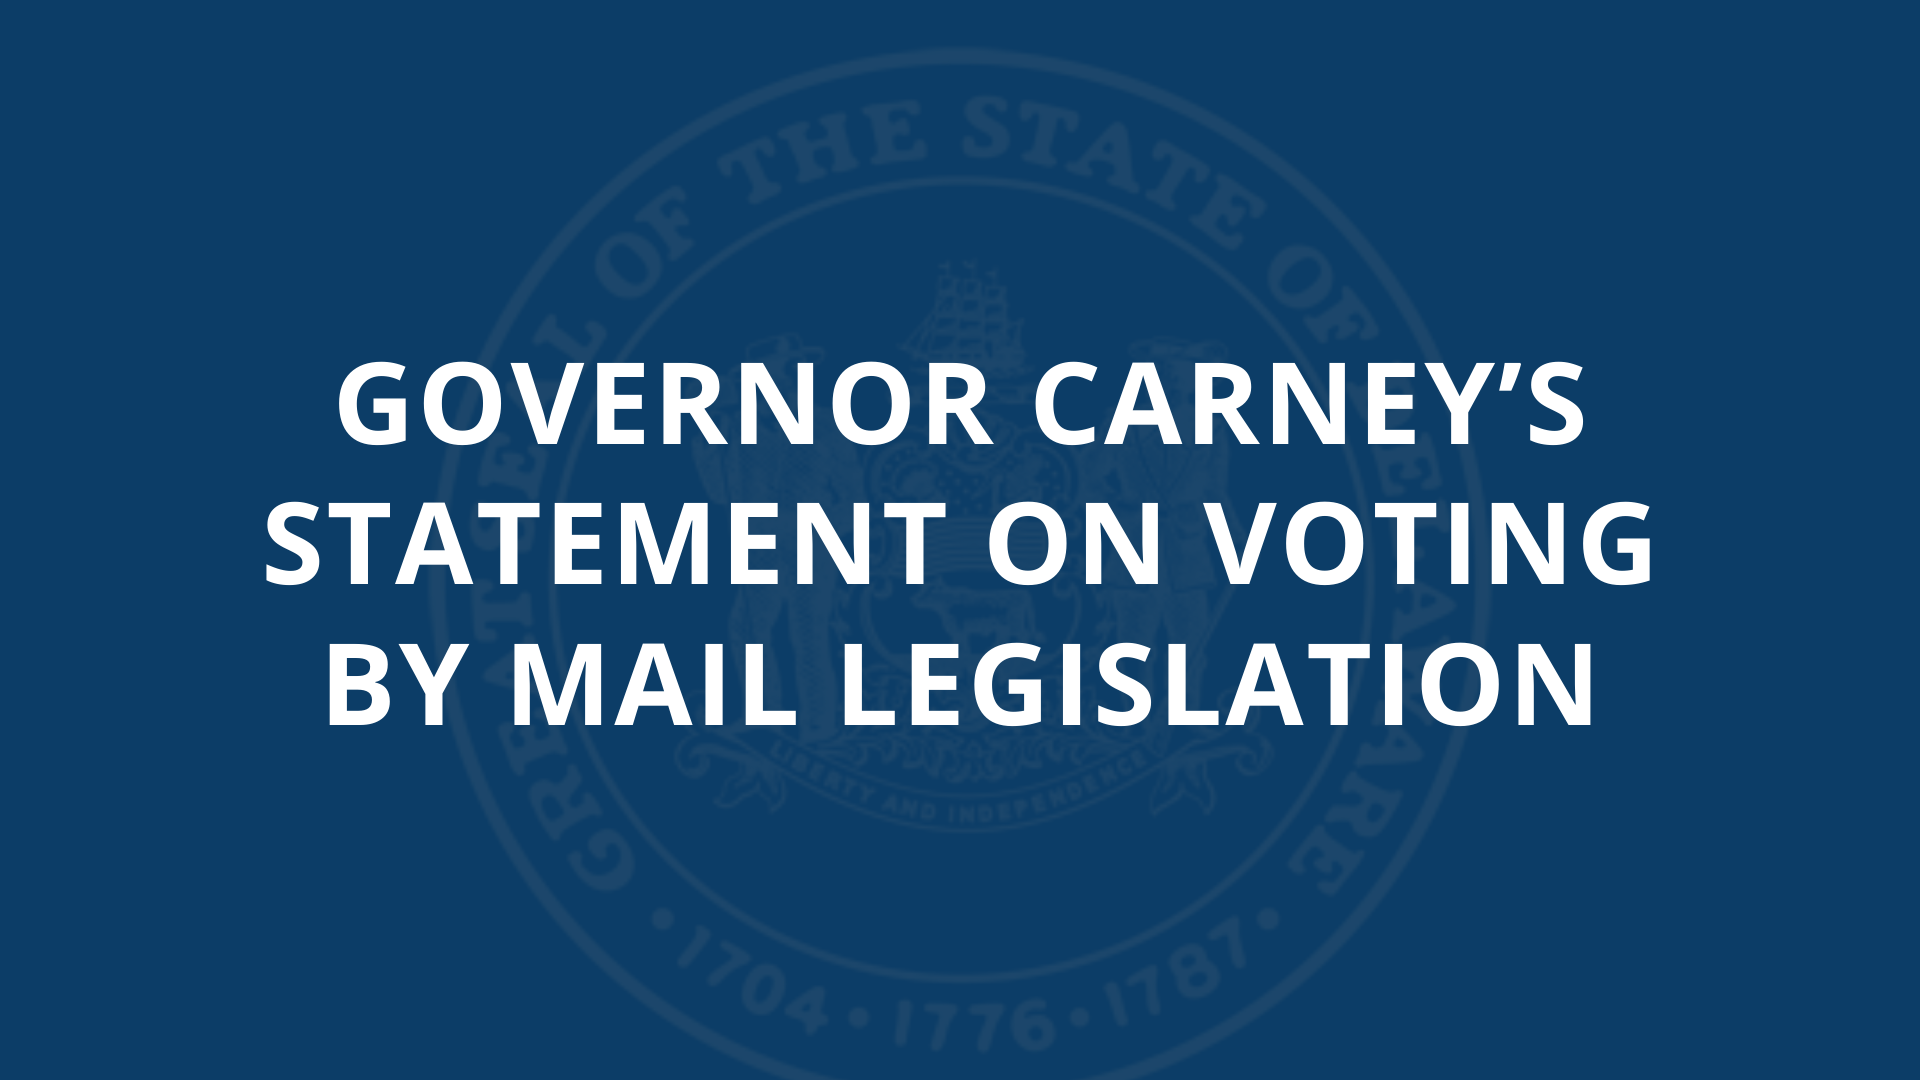 Governor Carney’s Statement on Voting by Mail Legislation